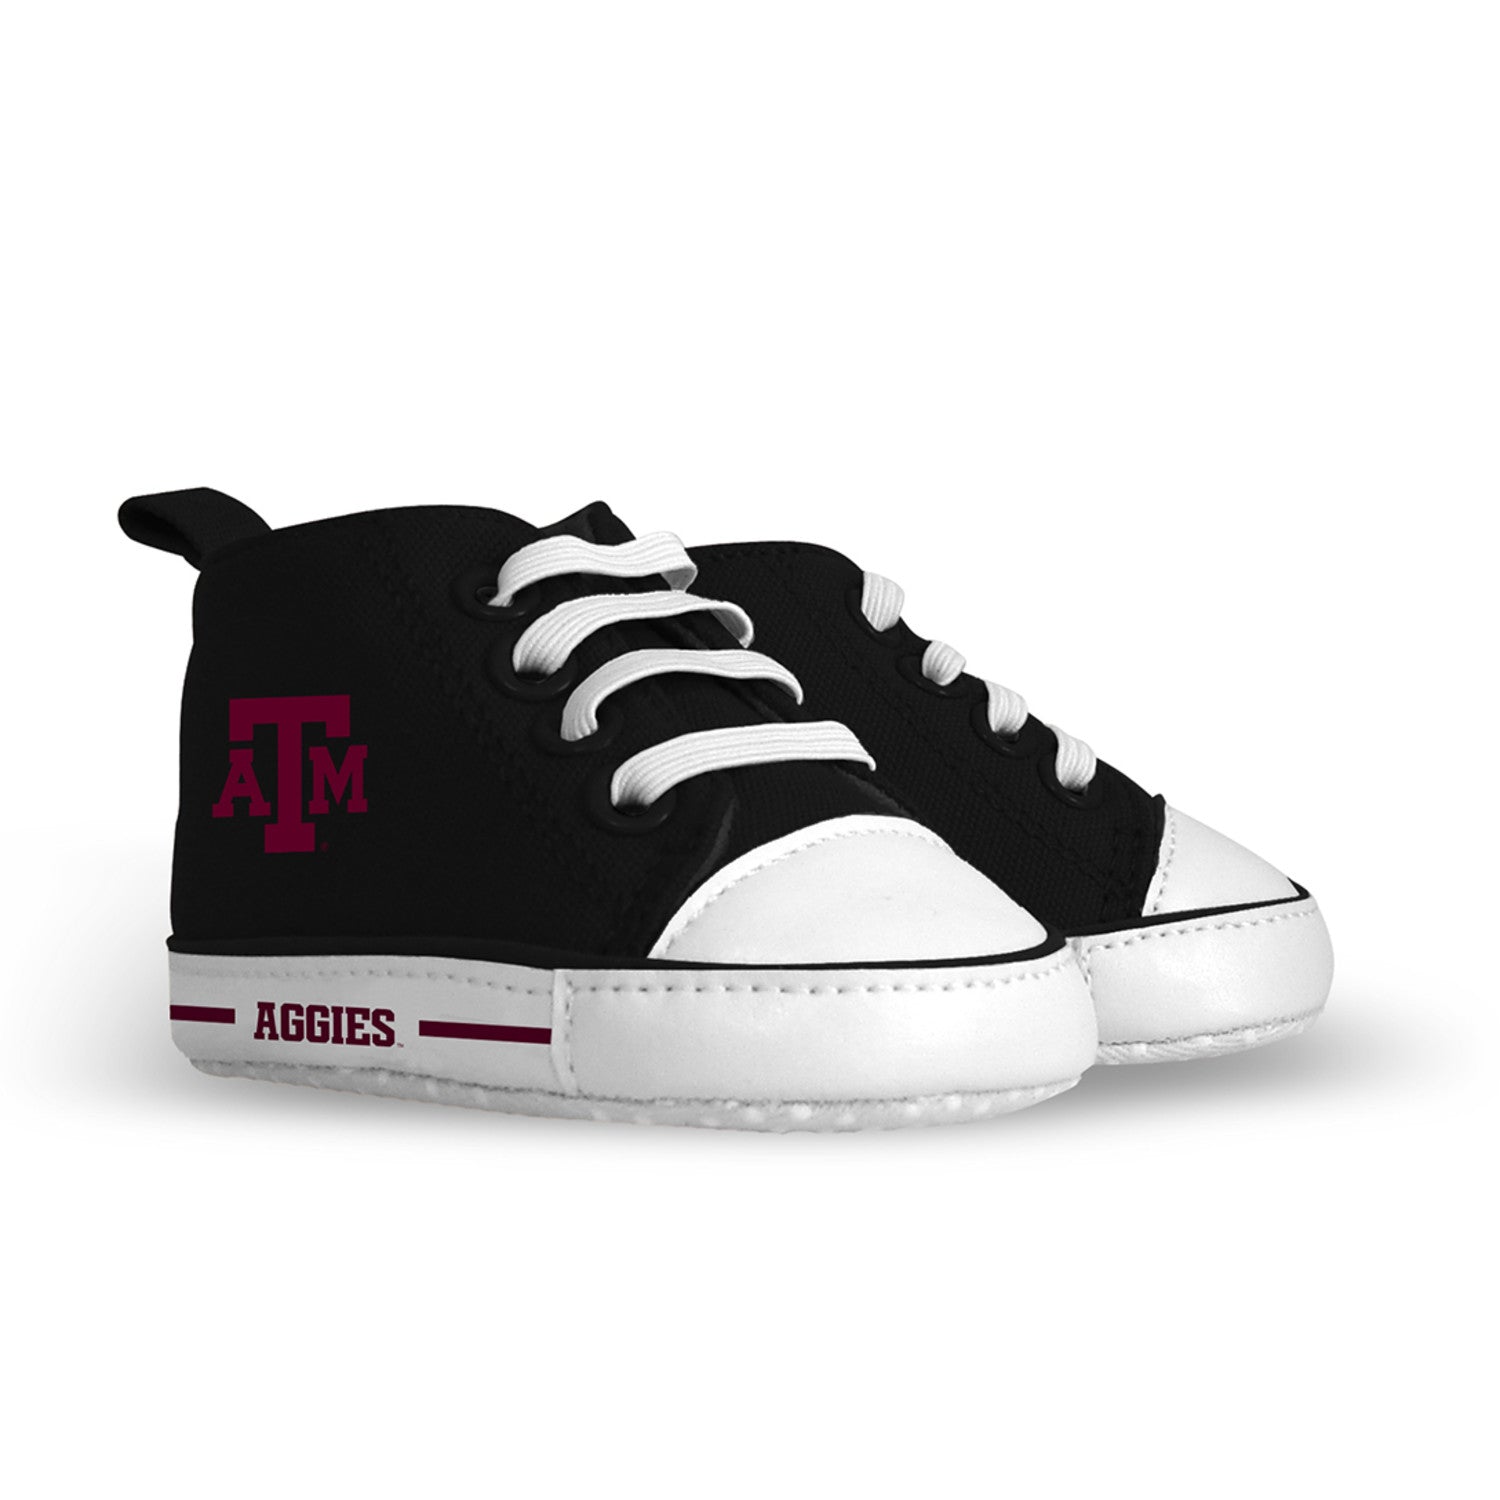 Texas A&M Aggies Baby Shoes